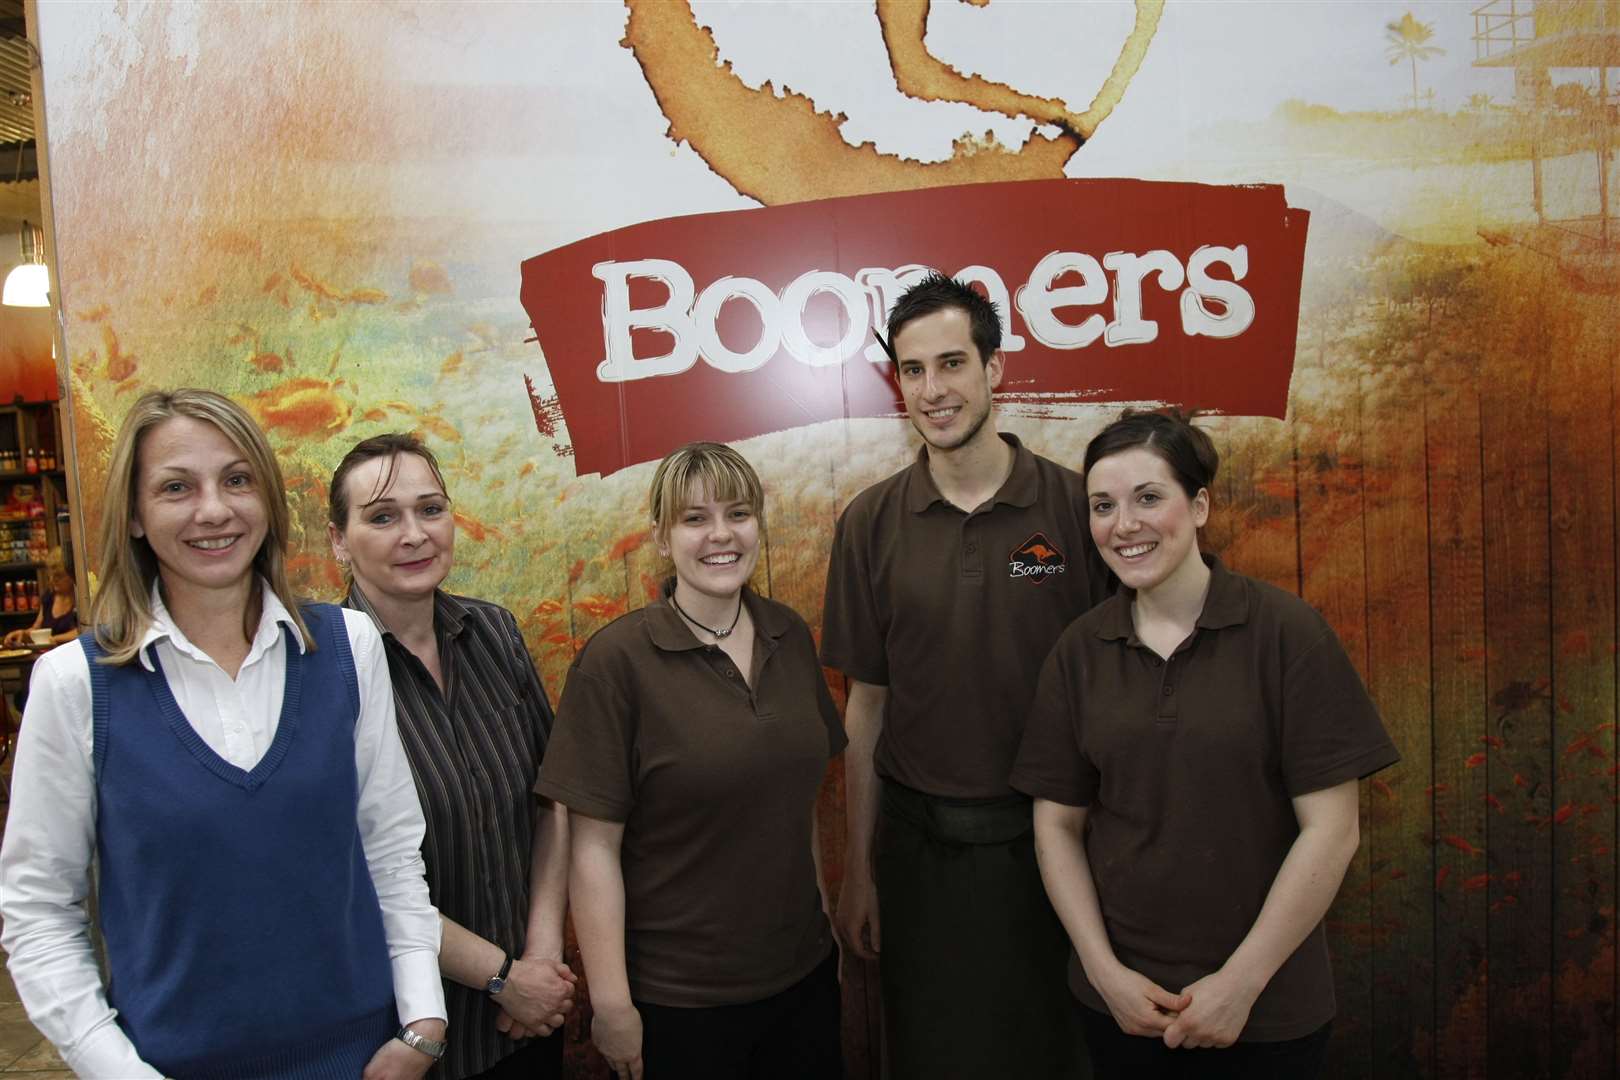 Staff at Boomers Restaurant when they entered the Medway Business Awards in 2011. Tracey Brooks is pictured far left